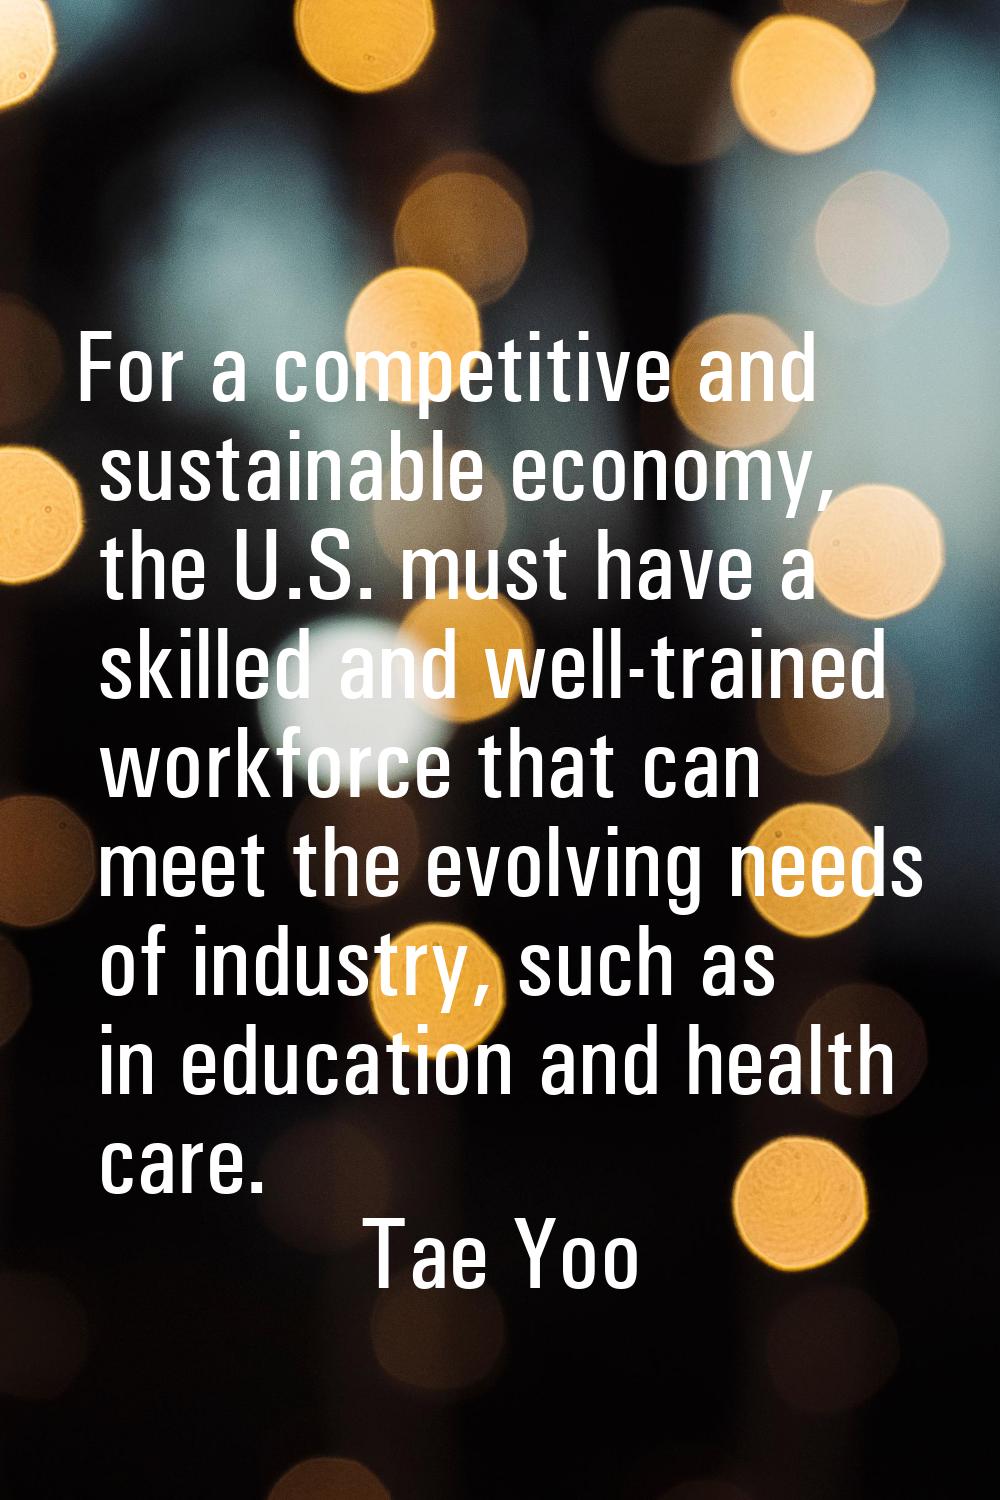 For a competitive and sustainable economy, the U.S. must have a skilled and well-trained workforce 